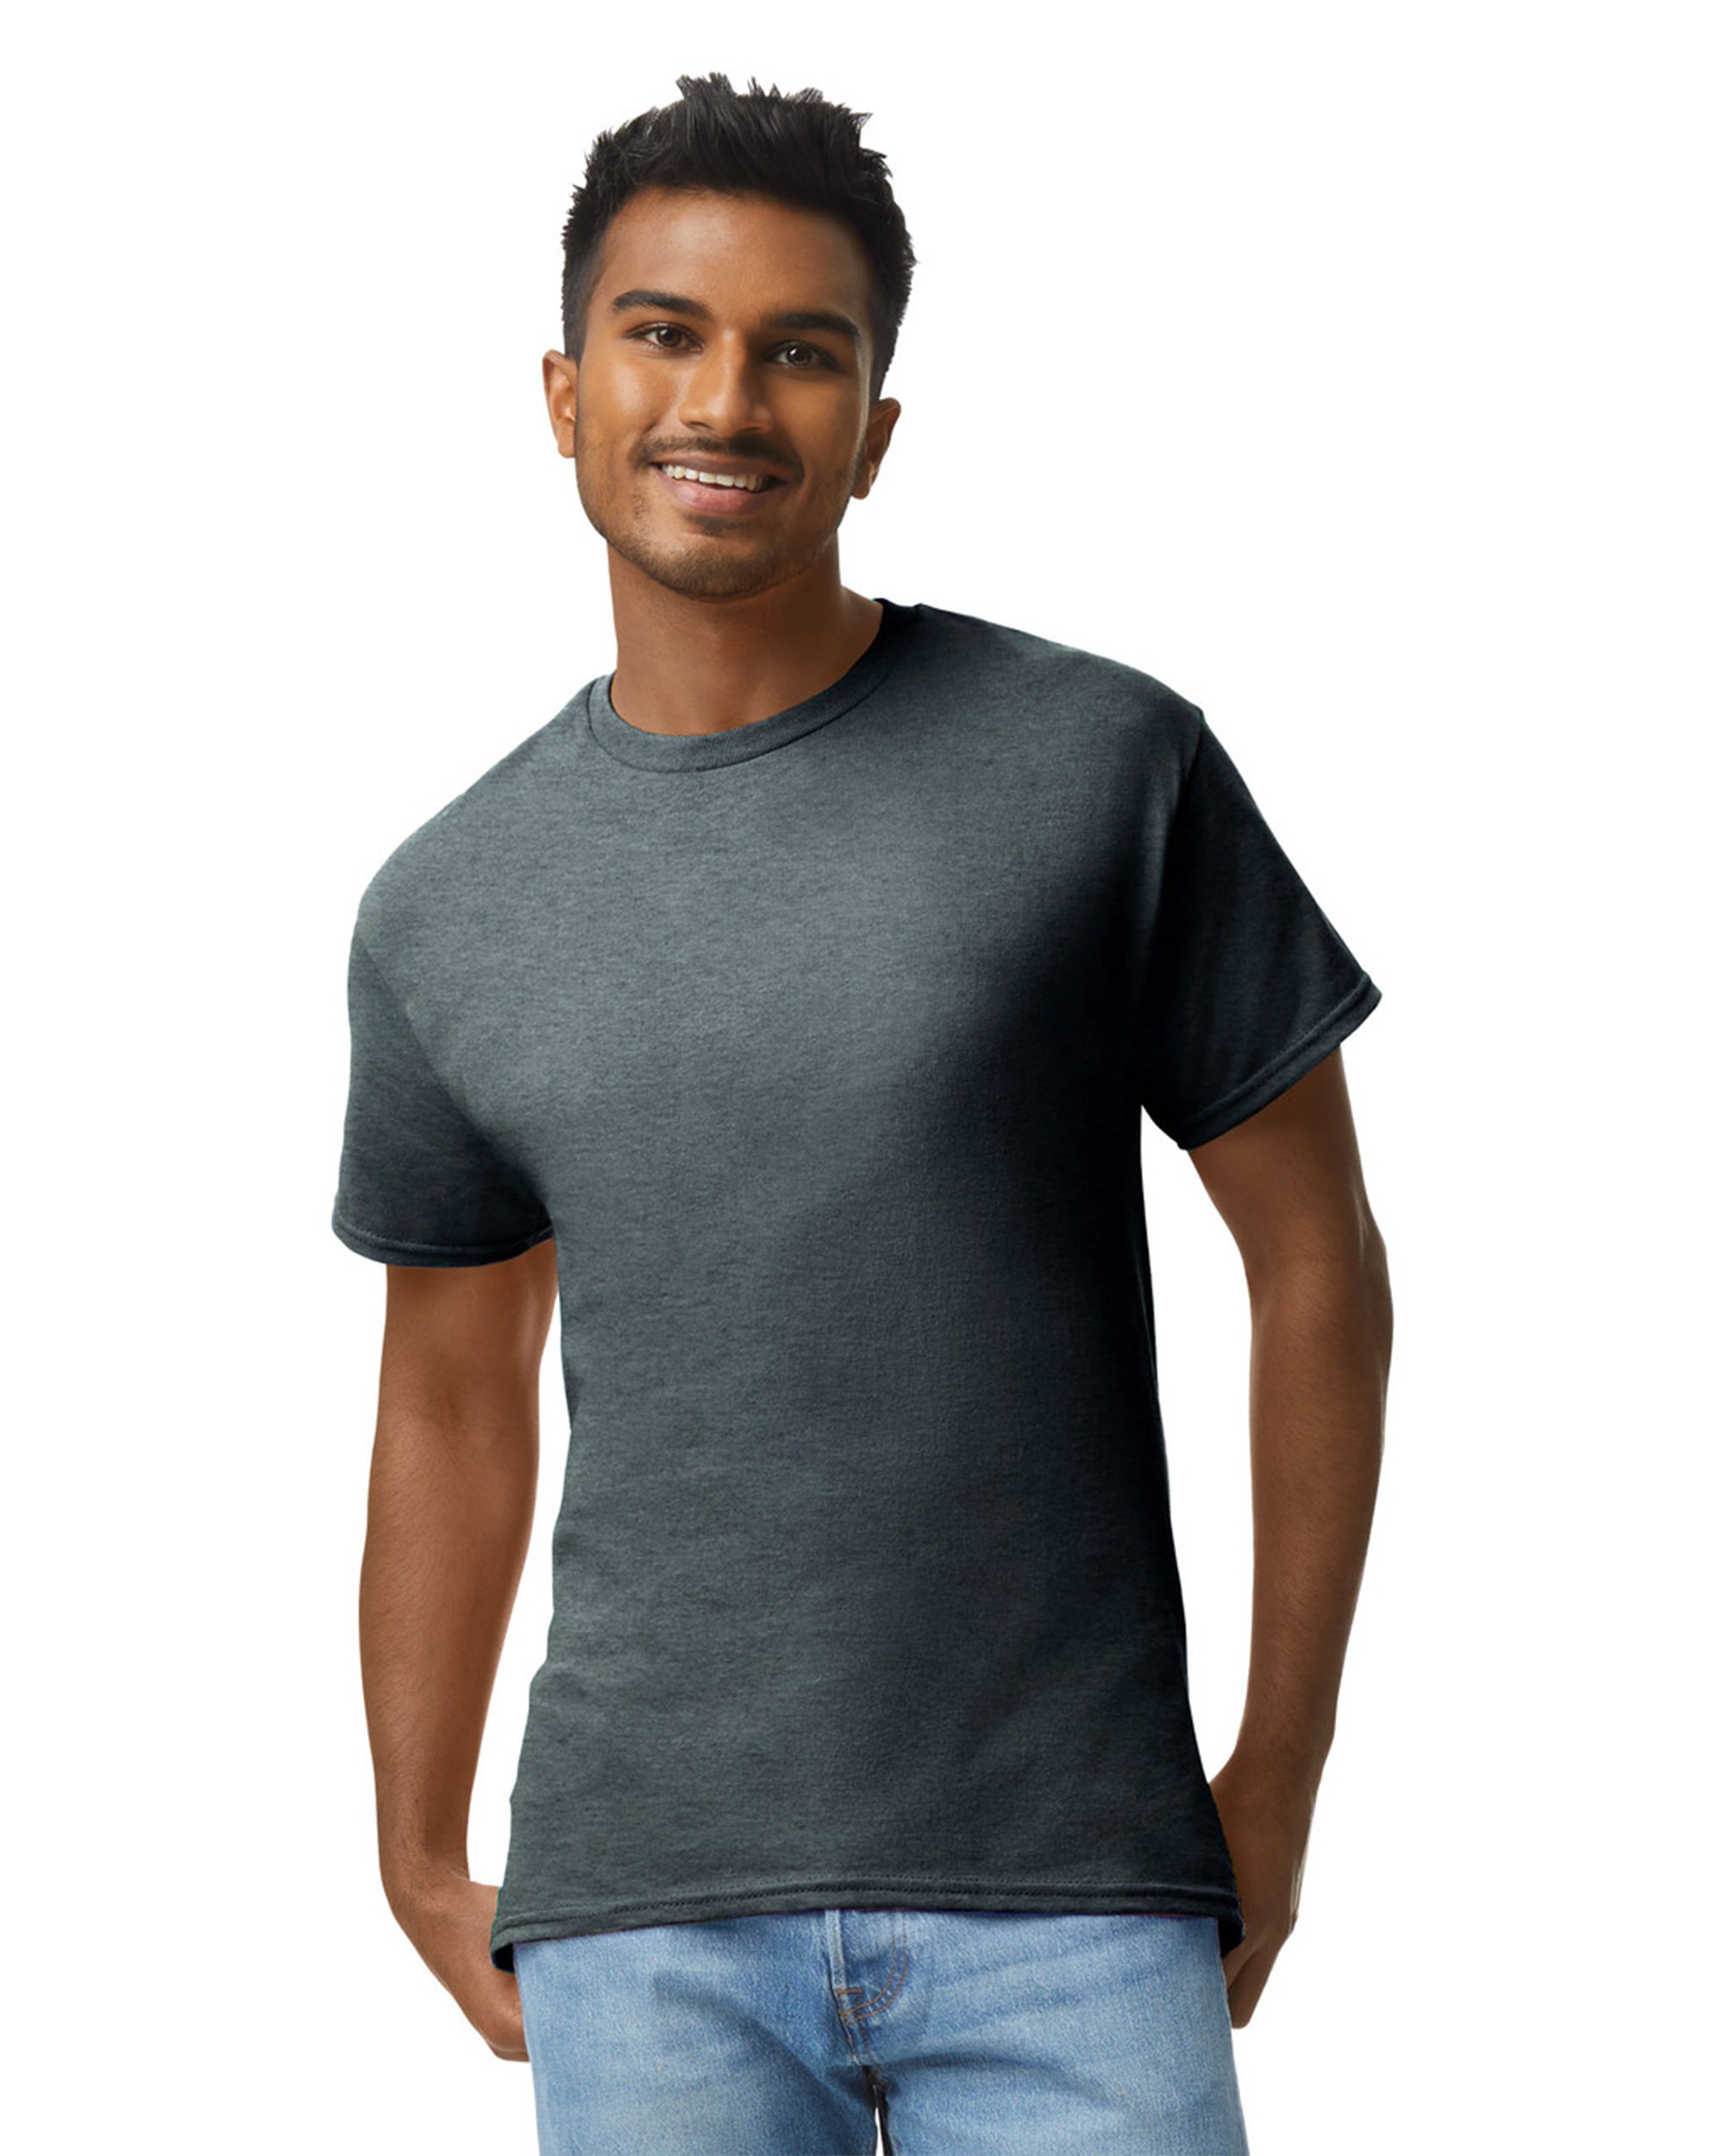 GD208 - Ultra Cotton® Adult T-Shirt - One Stop